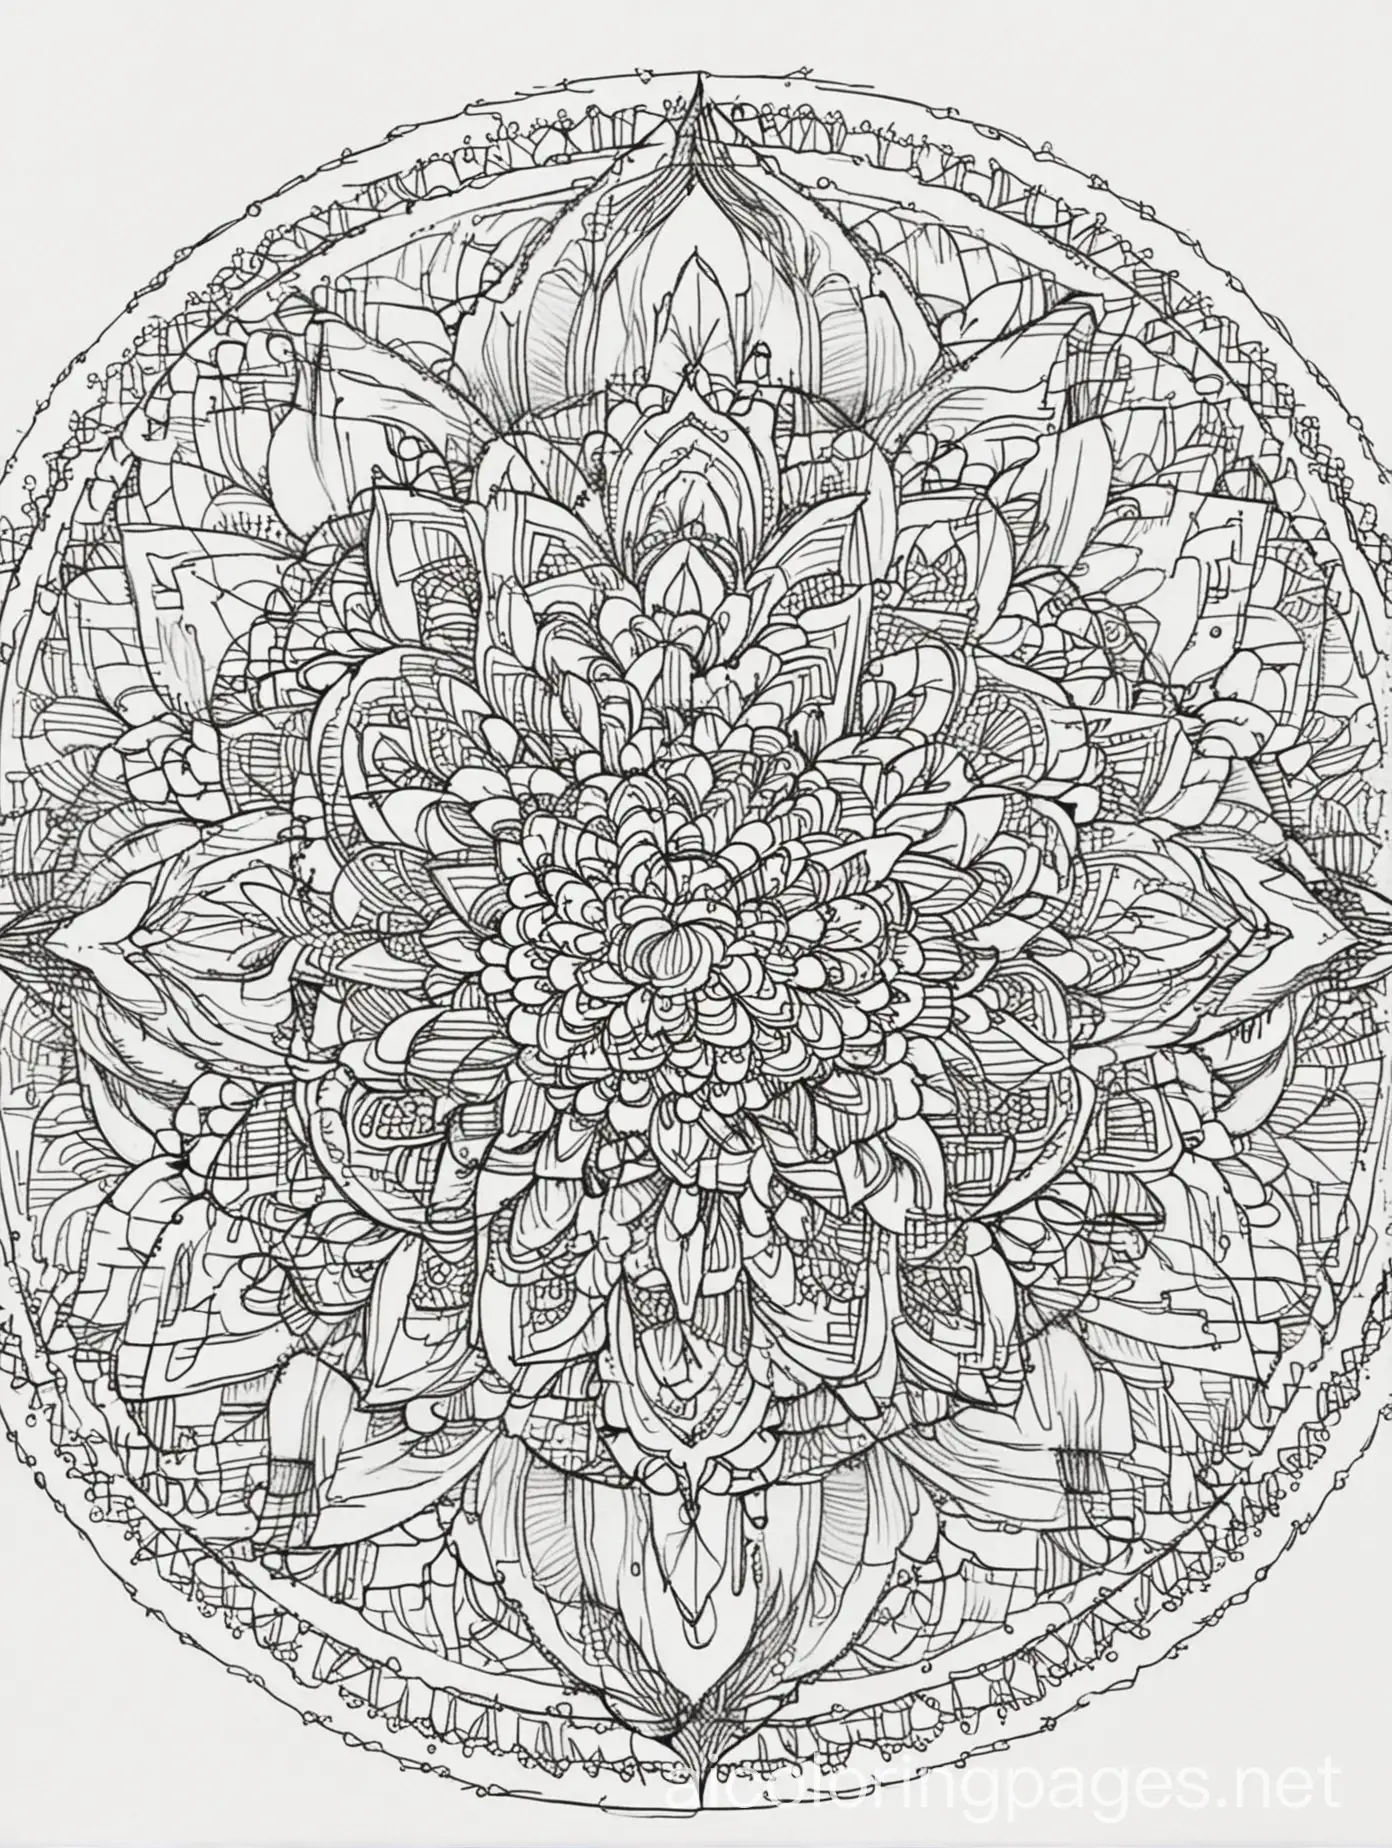 Simple-Mandala-Coloring-Page-for-Kids-Black-and-White-Line-Art